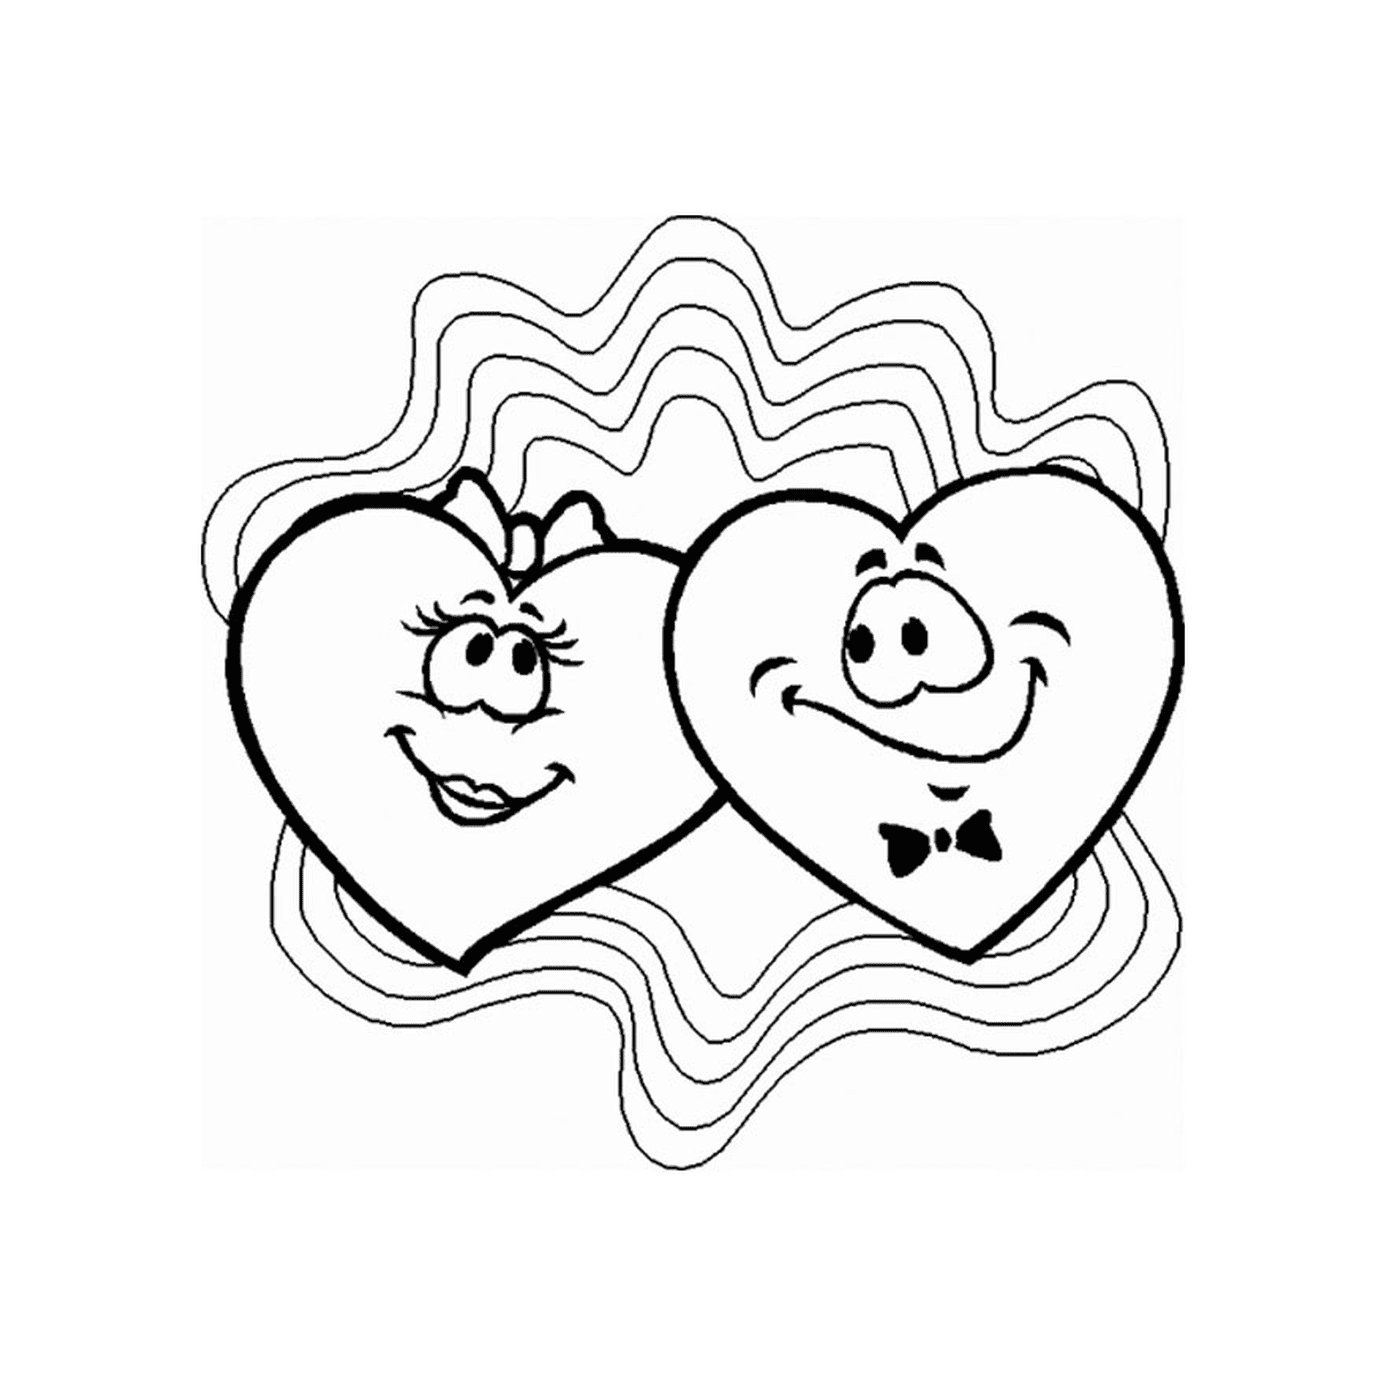  Two smiling hearts 